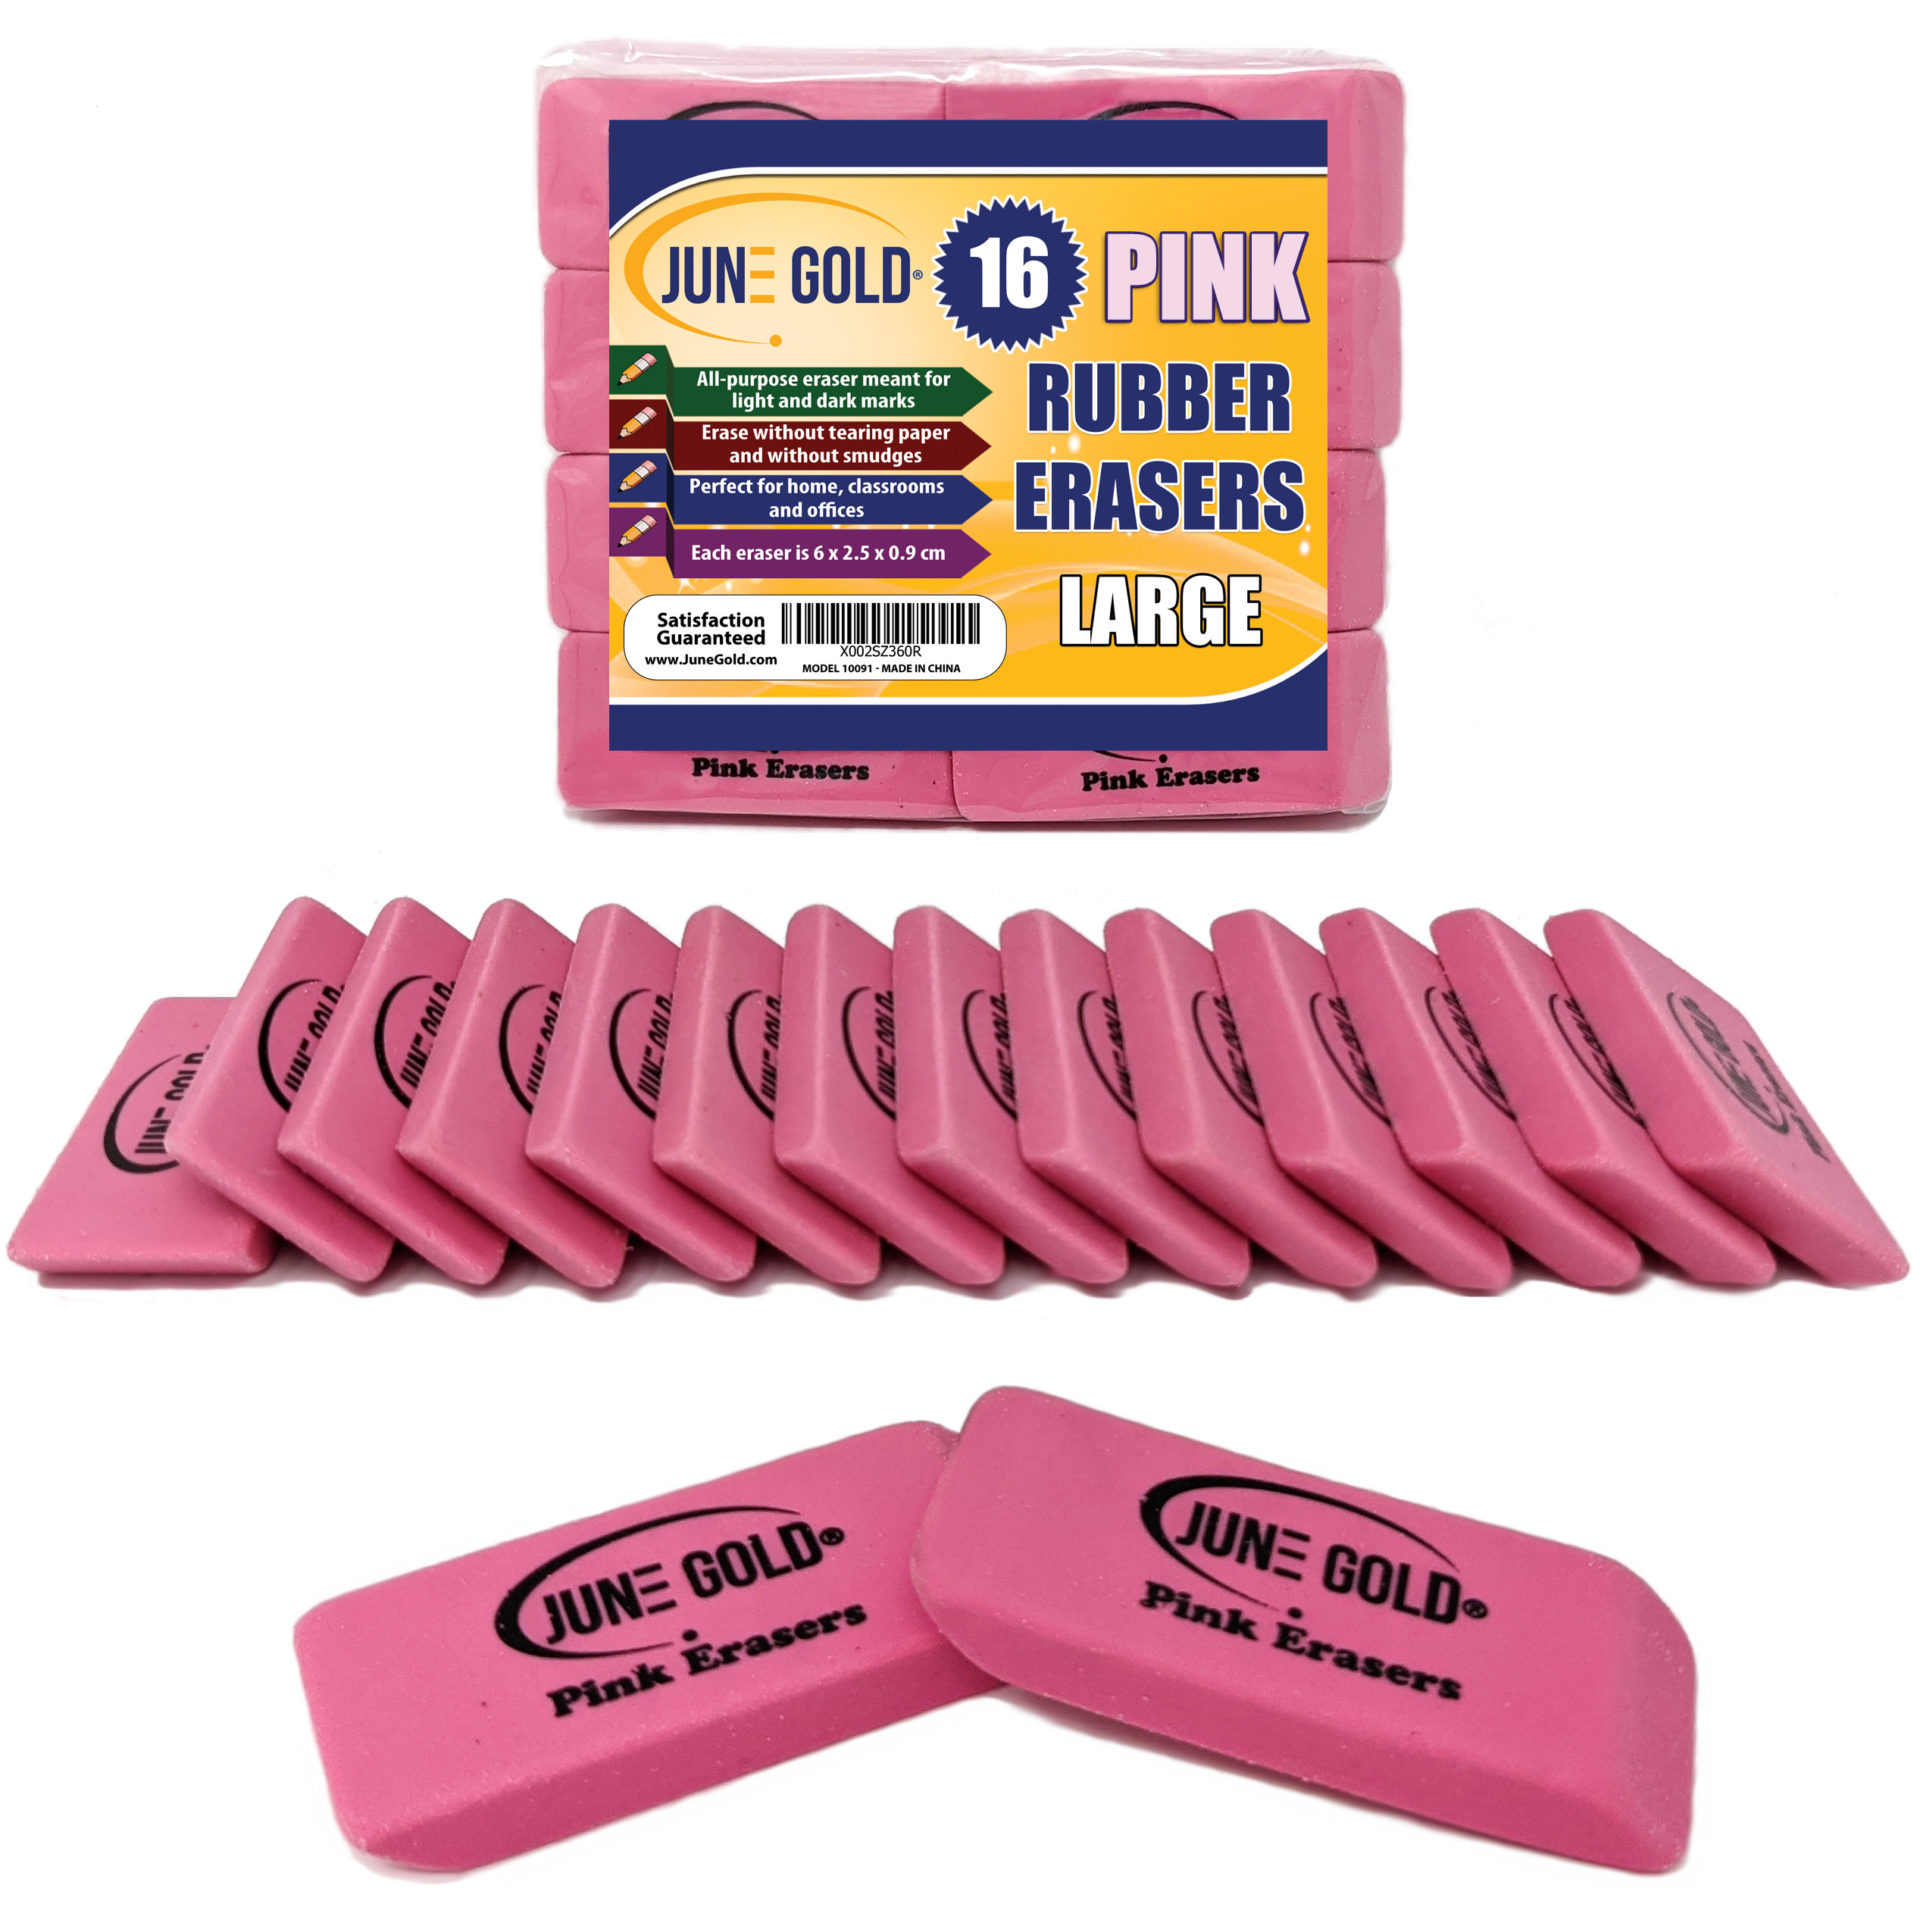 Smudge-Proof Pink Erasers 6 Count 